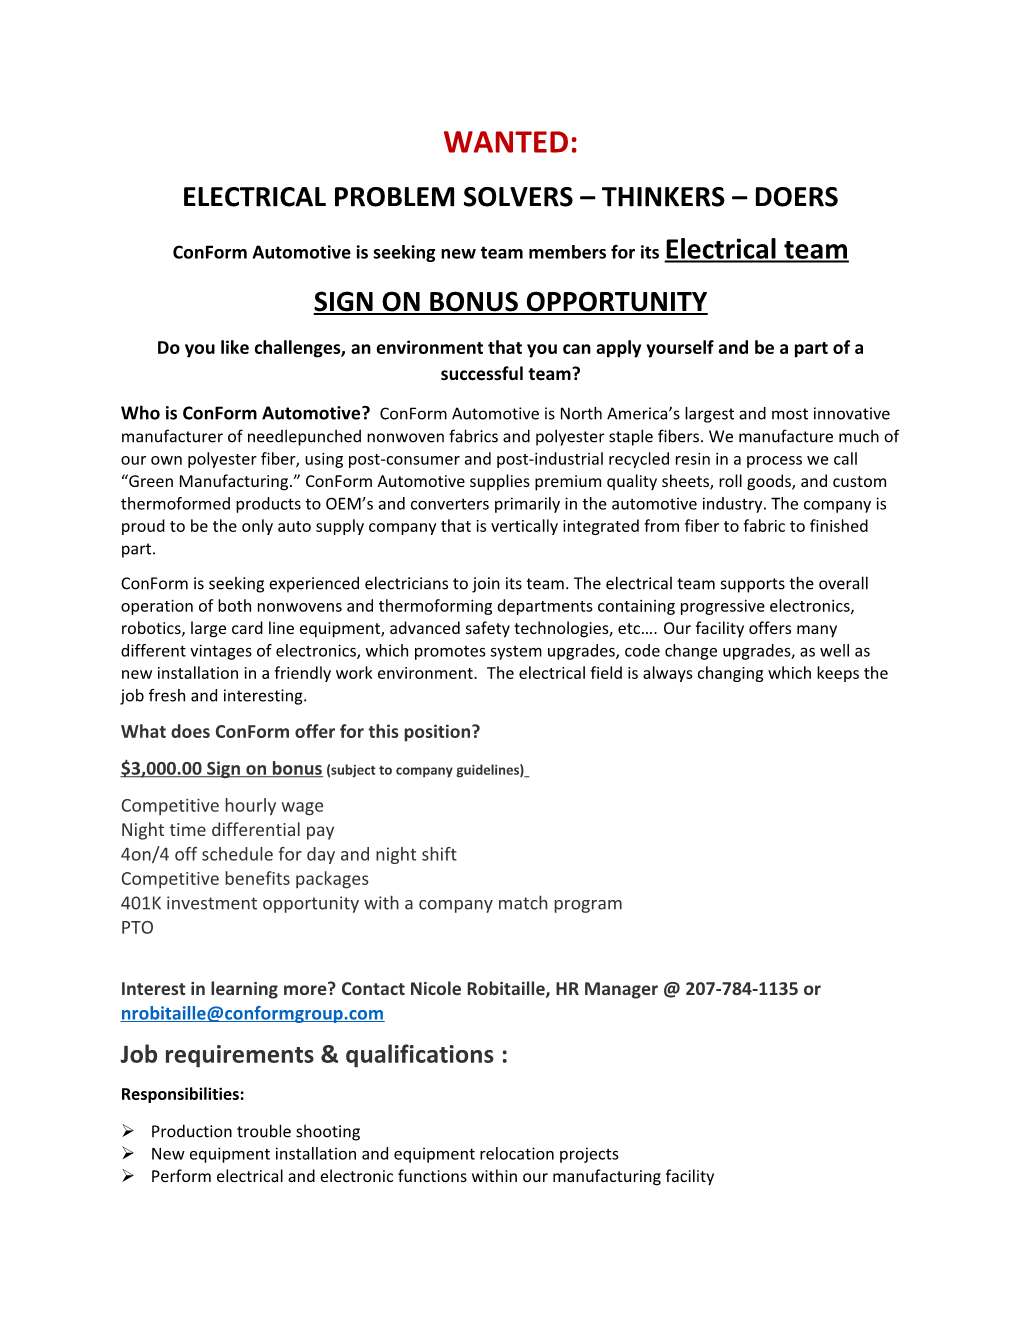 Electrical Problem Solvers Thinkers Doers